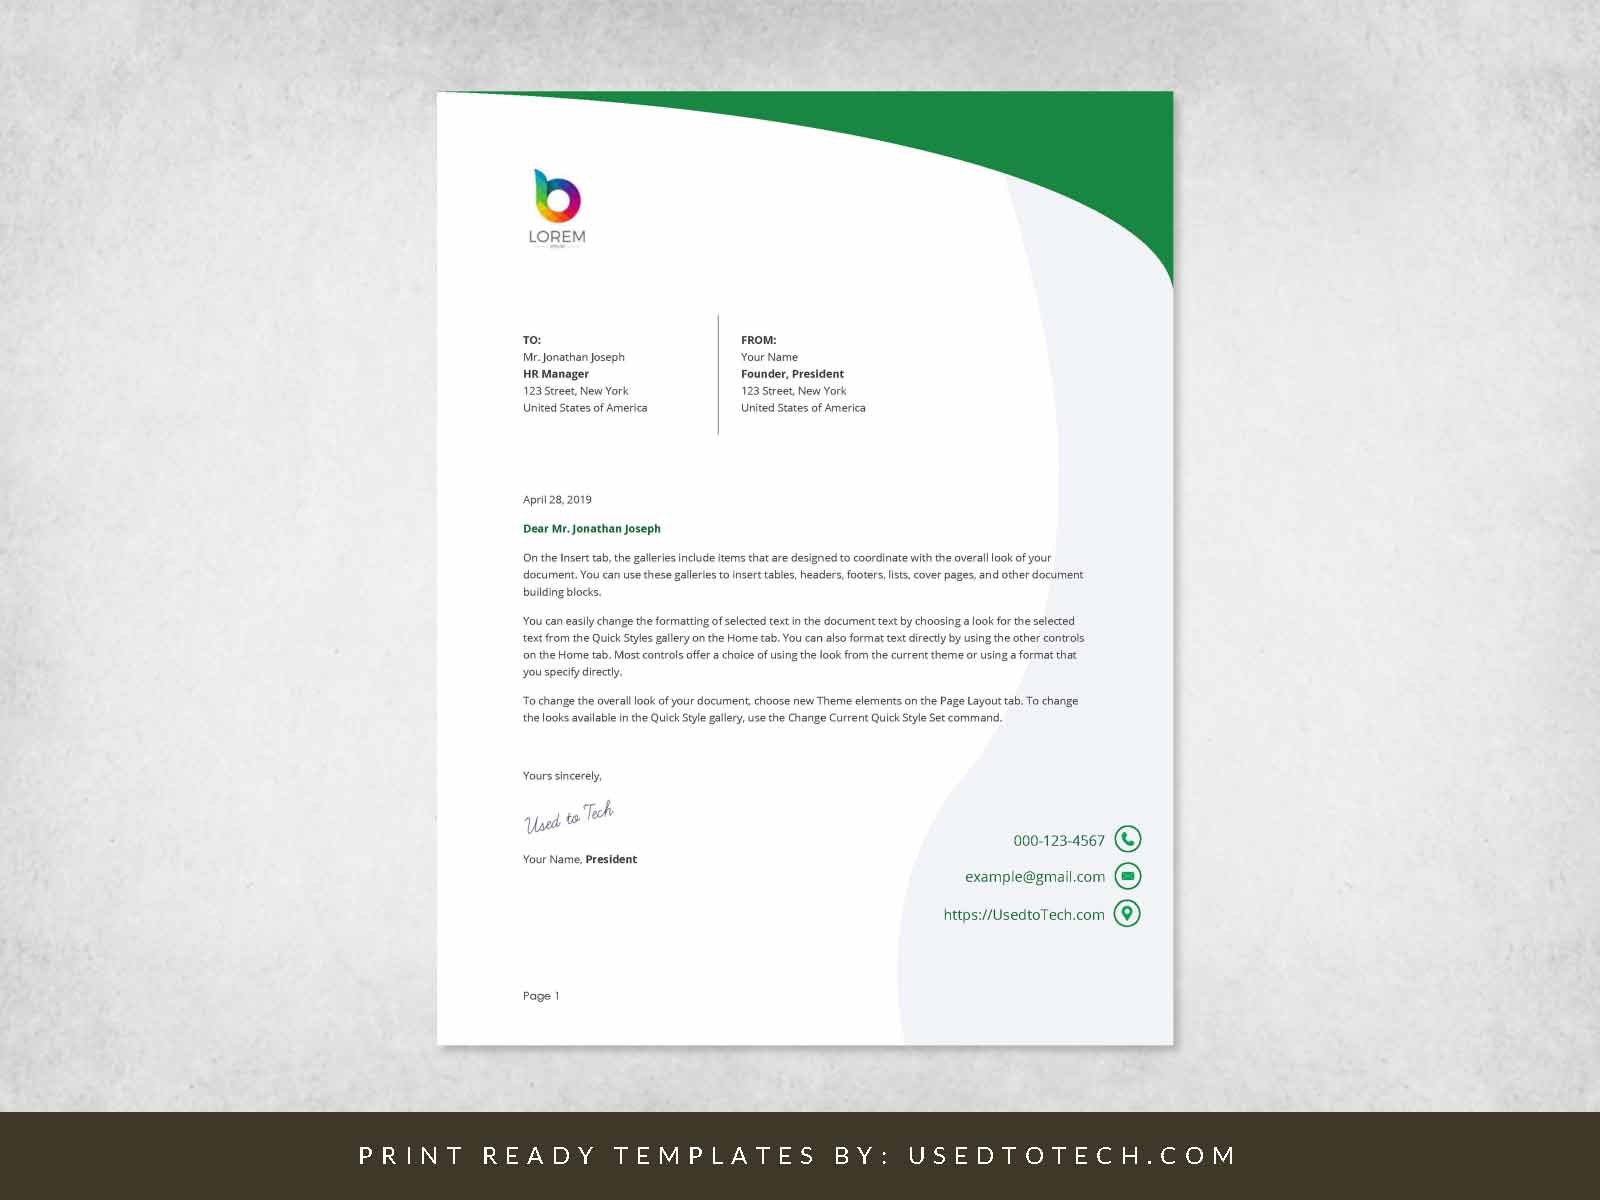 Perfect letterhead design in Word free - Used to Tech Inside Free Letterhead Templates For Microsoft Word